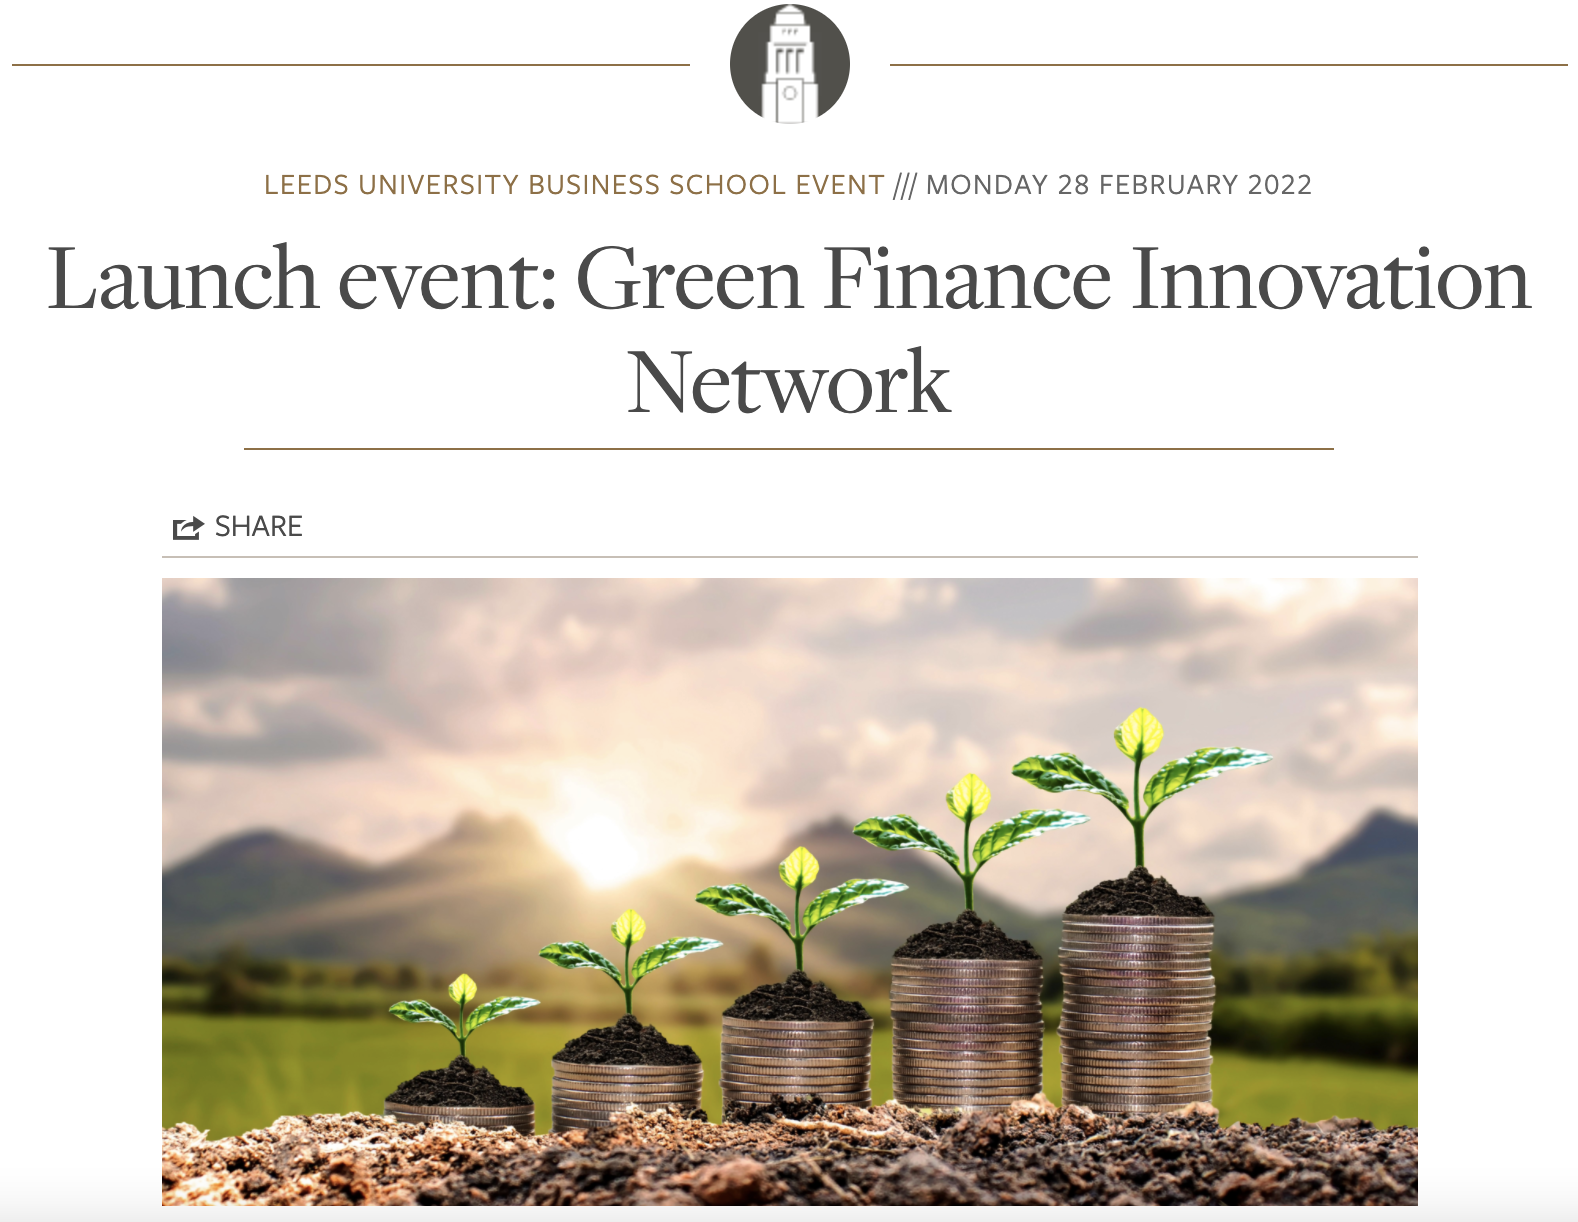 Green Finance Innovation Network launched by University of Leeds – launch event 28th February